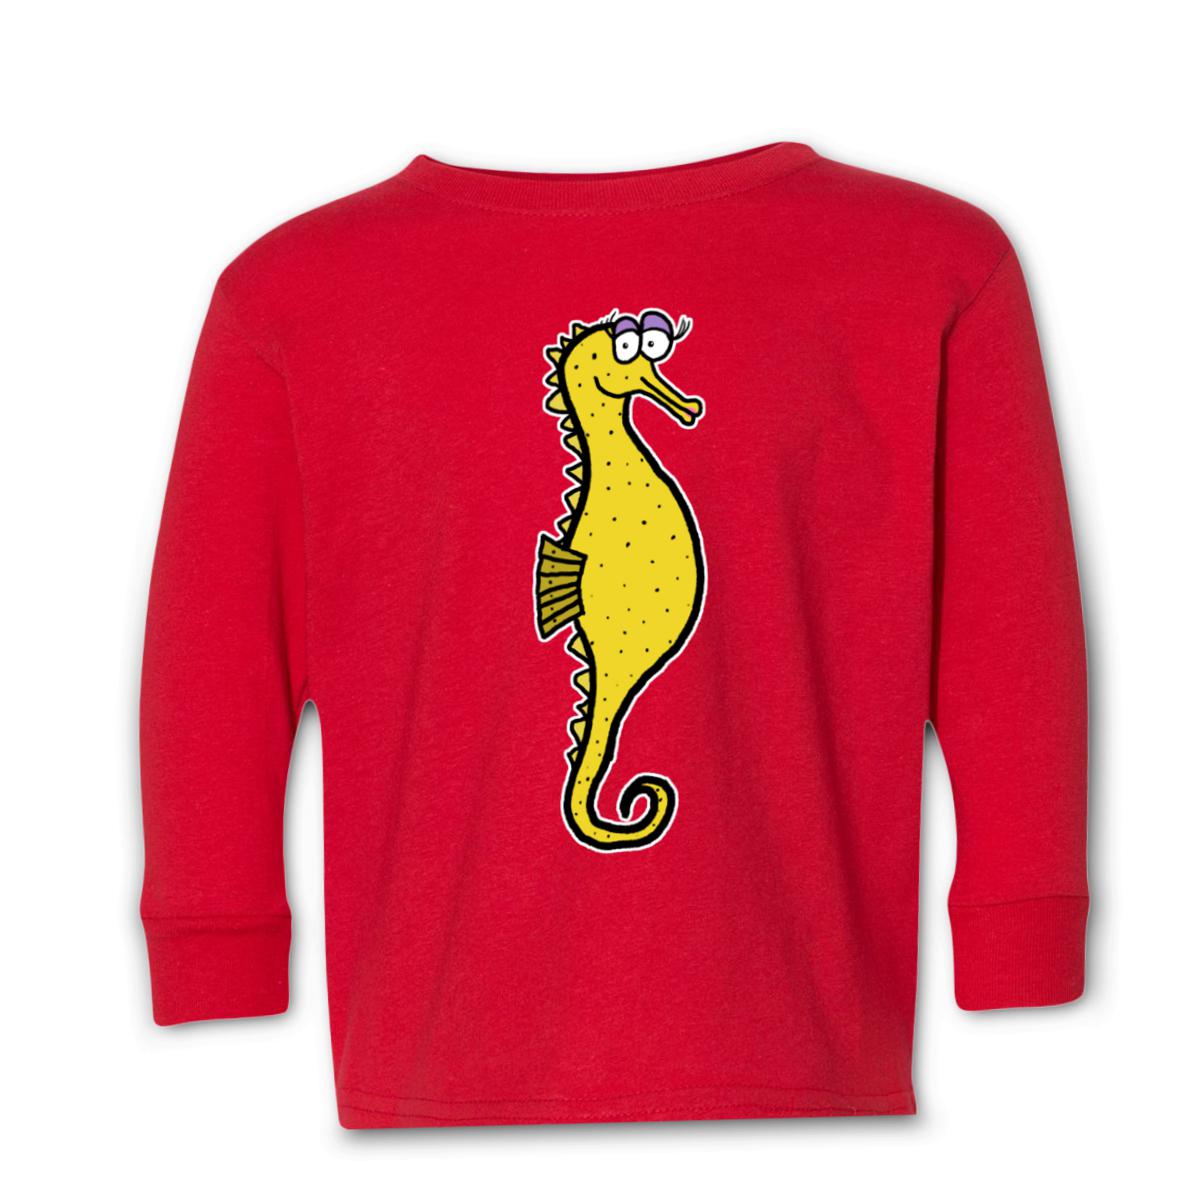 Seahorse Toddler Long Sleeve Tee 2T red